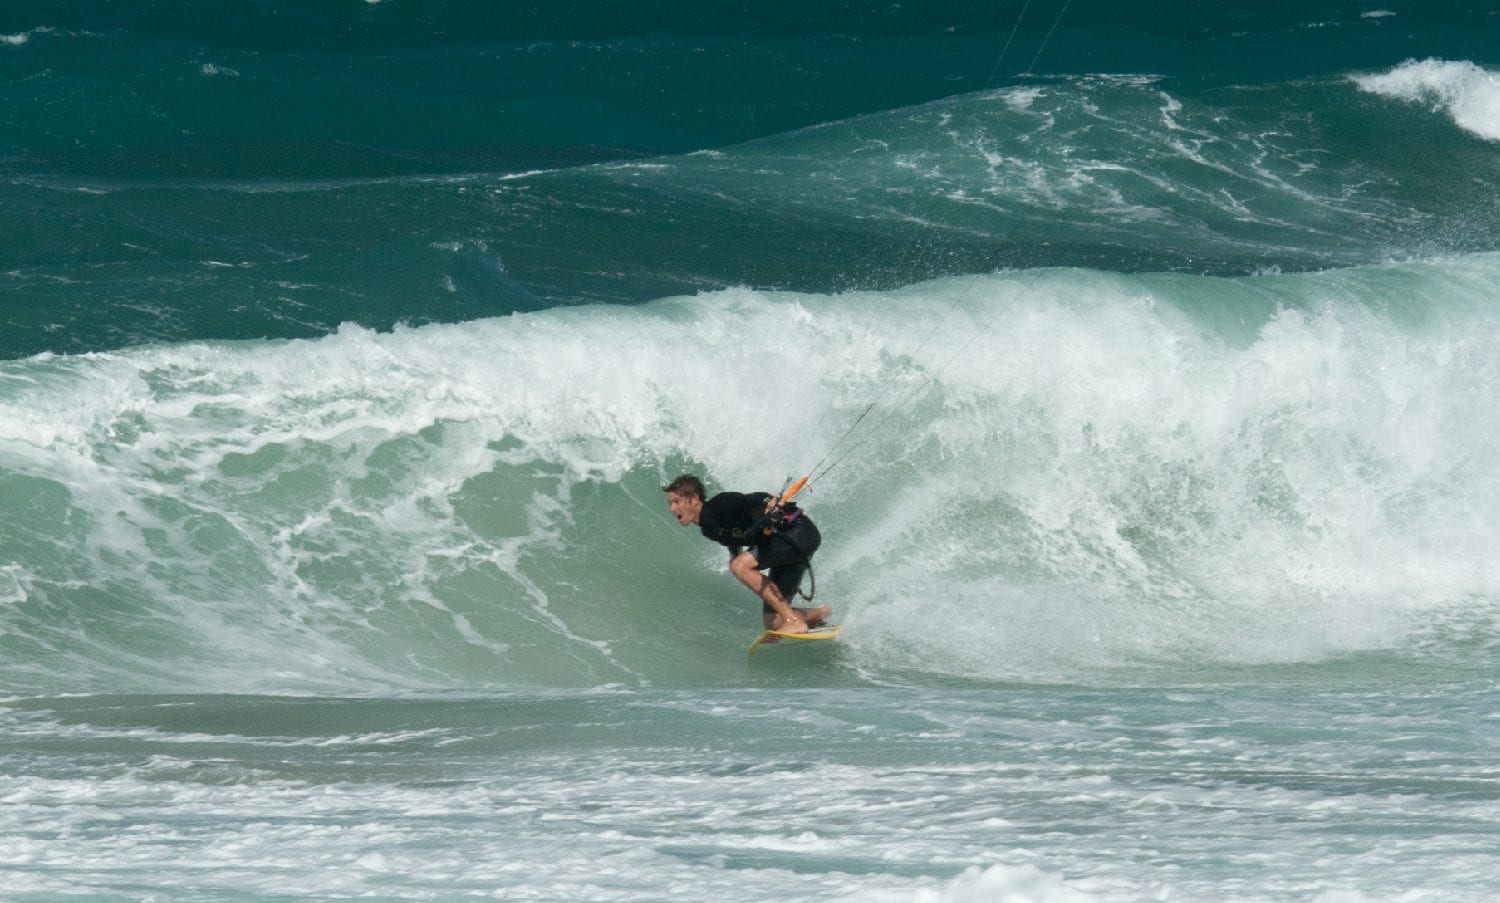 Trimming for the tunnel in short period wind swell. // Photo Gary Strachan